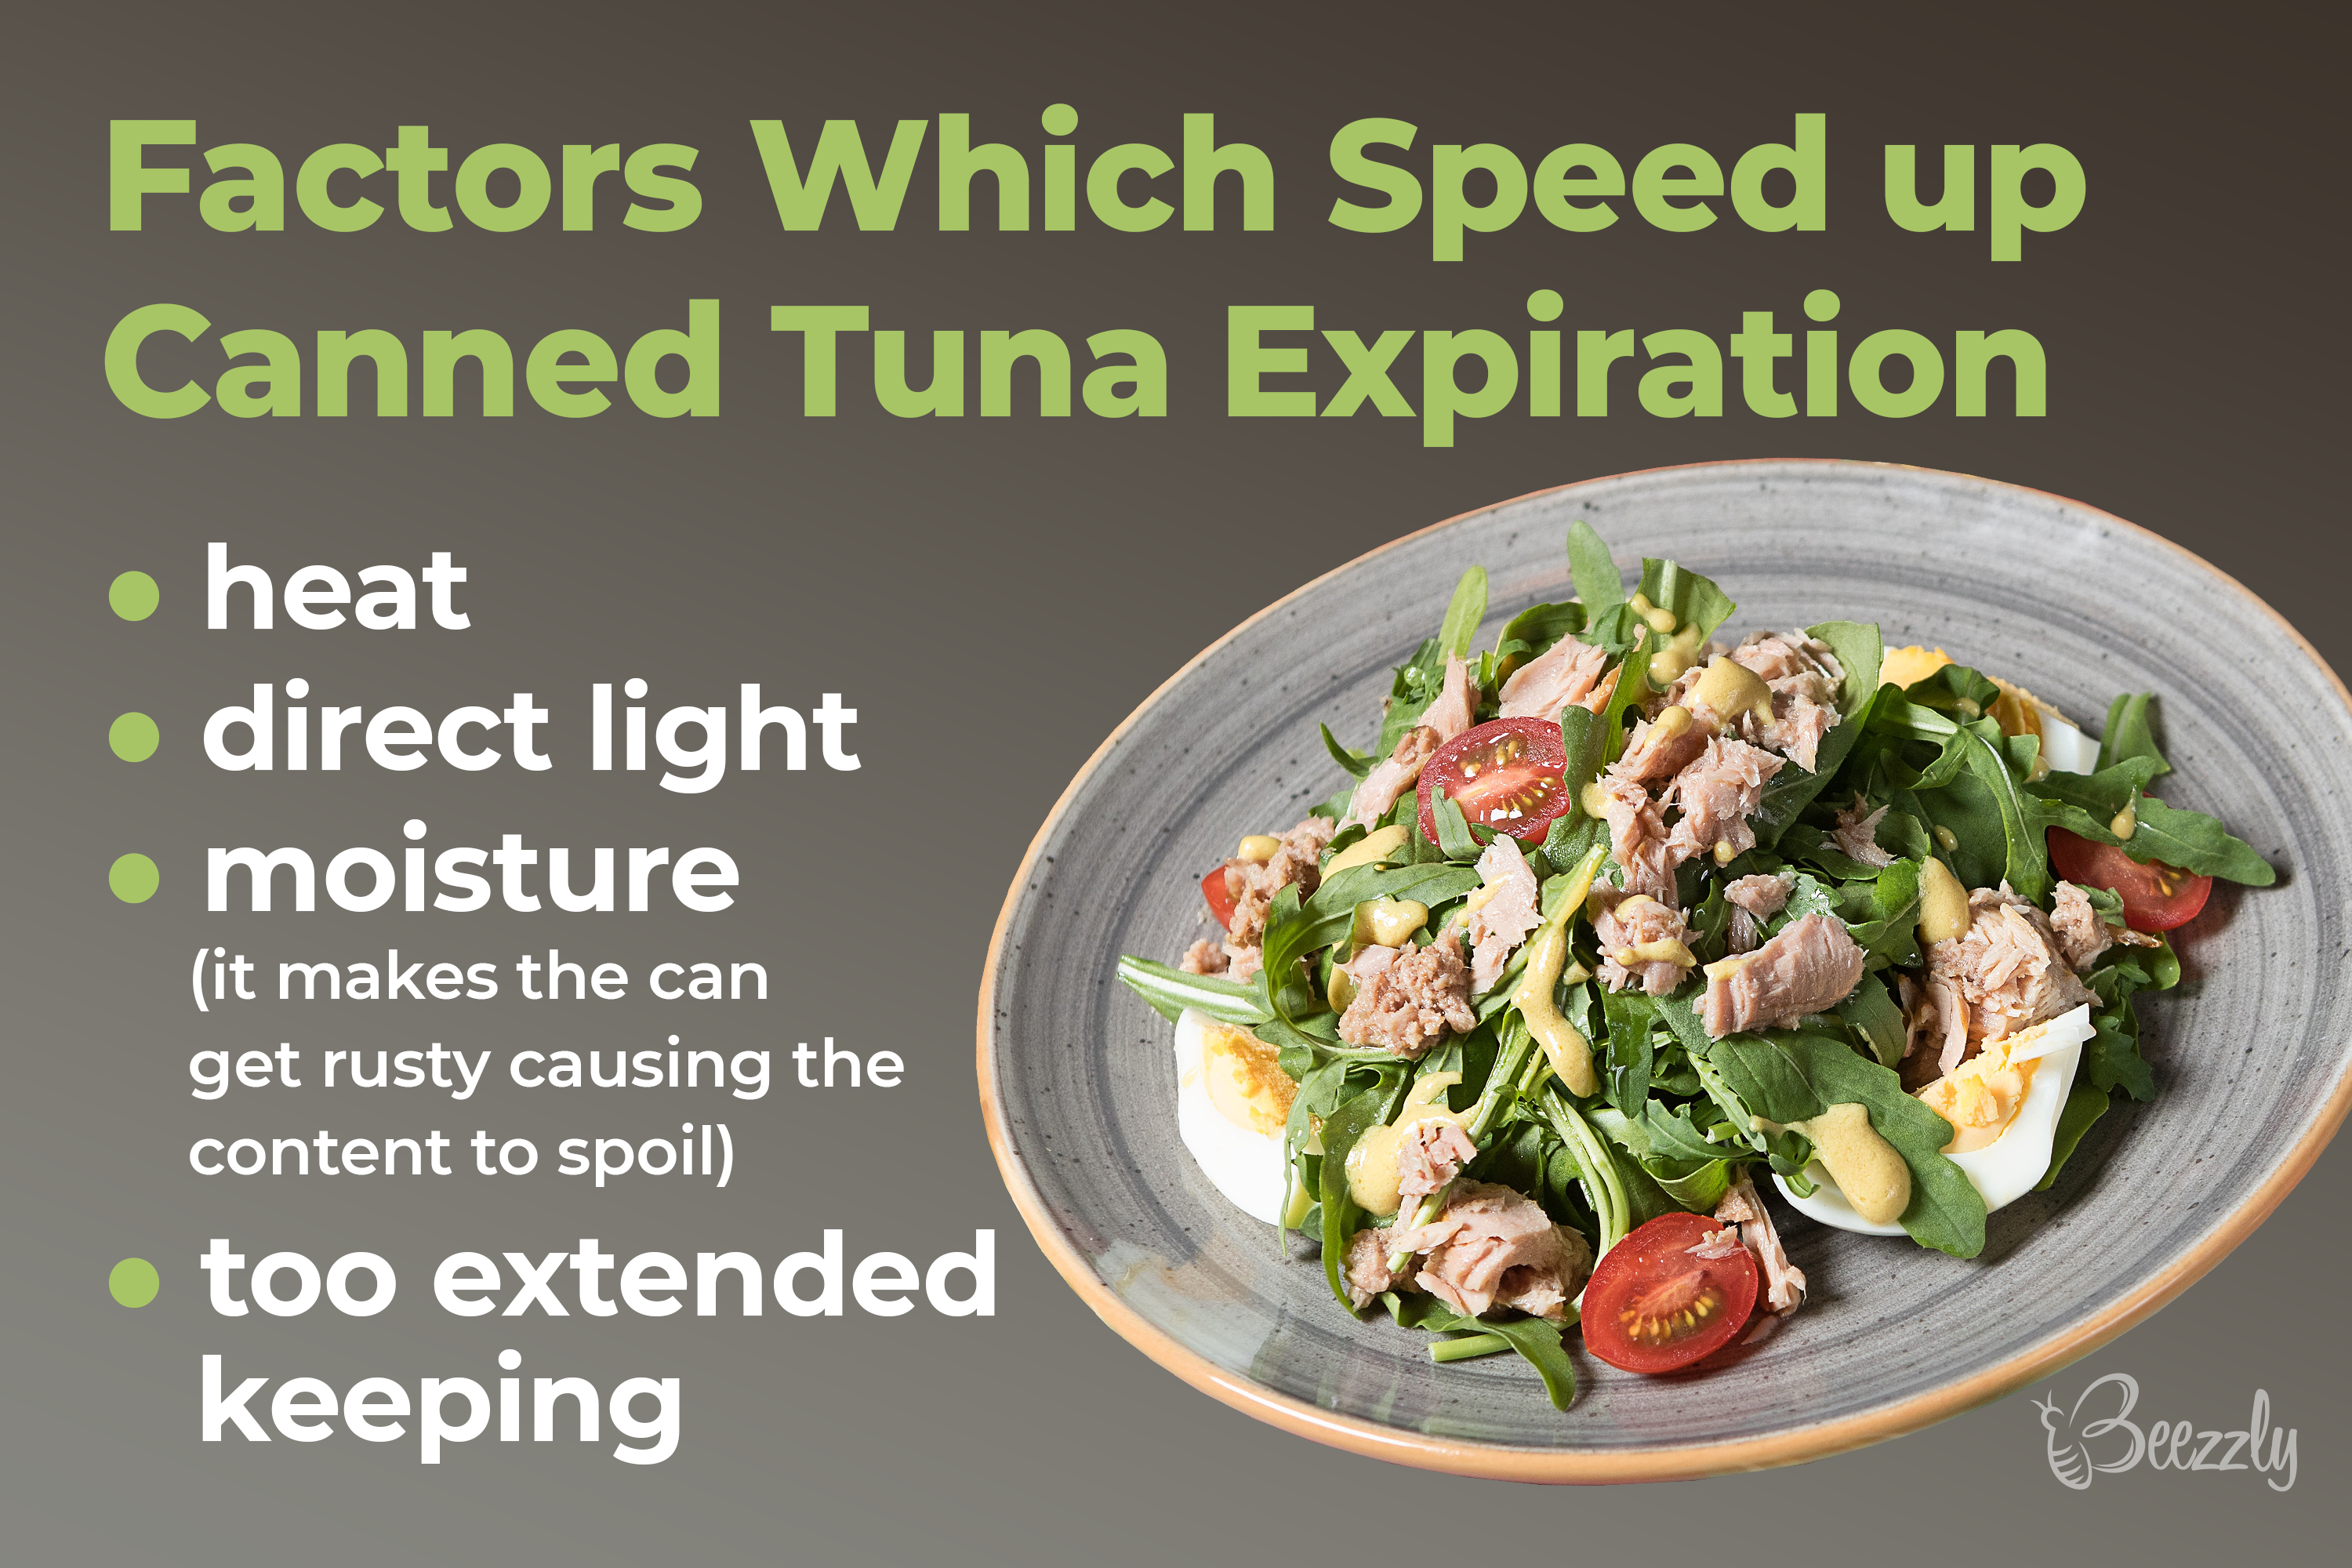 Factors which speed up canned tuna expiration